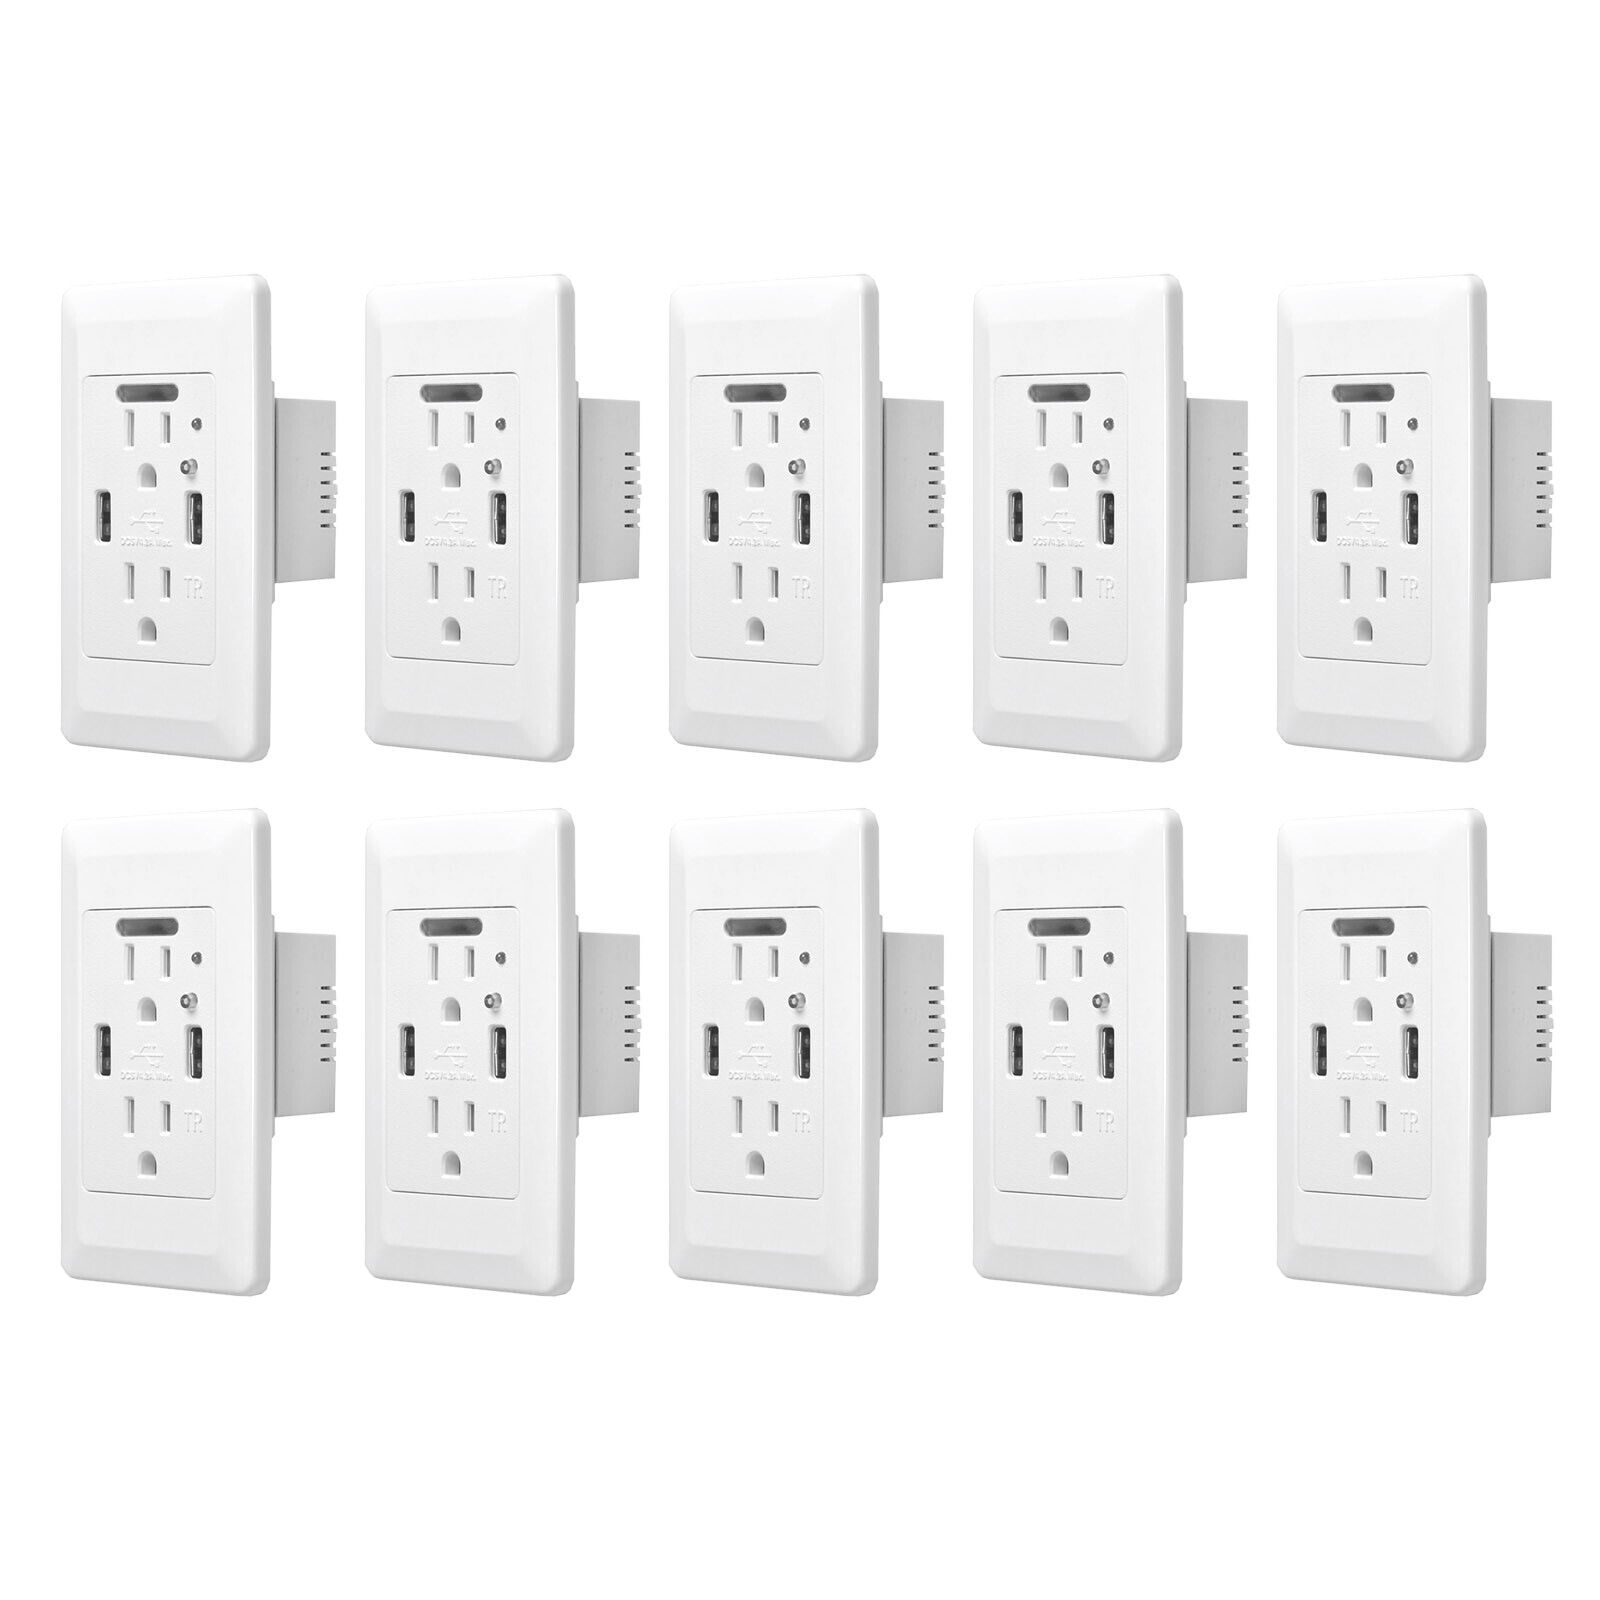 10 PK High Speed 4.2A USB Charger Outlet Receptacle with Plate White for iPhone